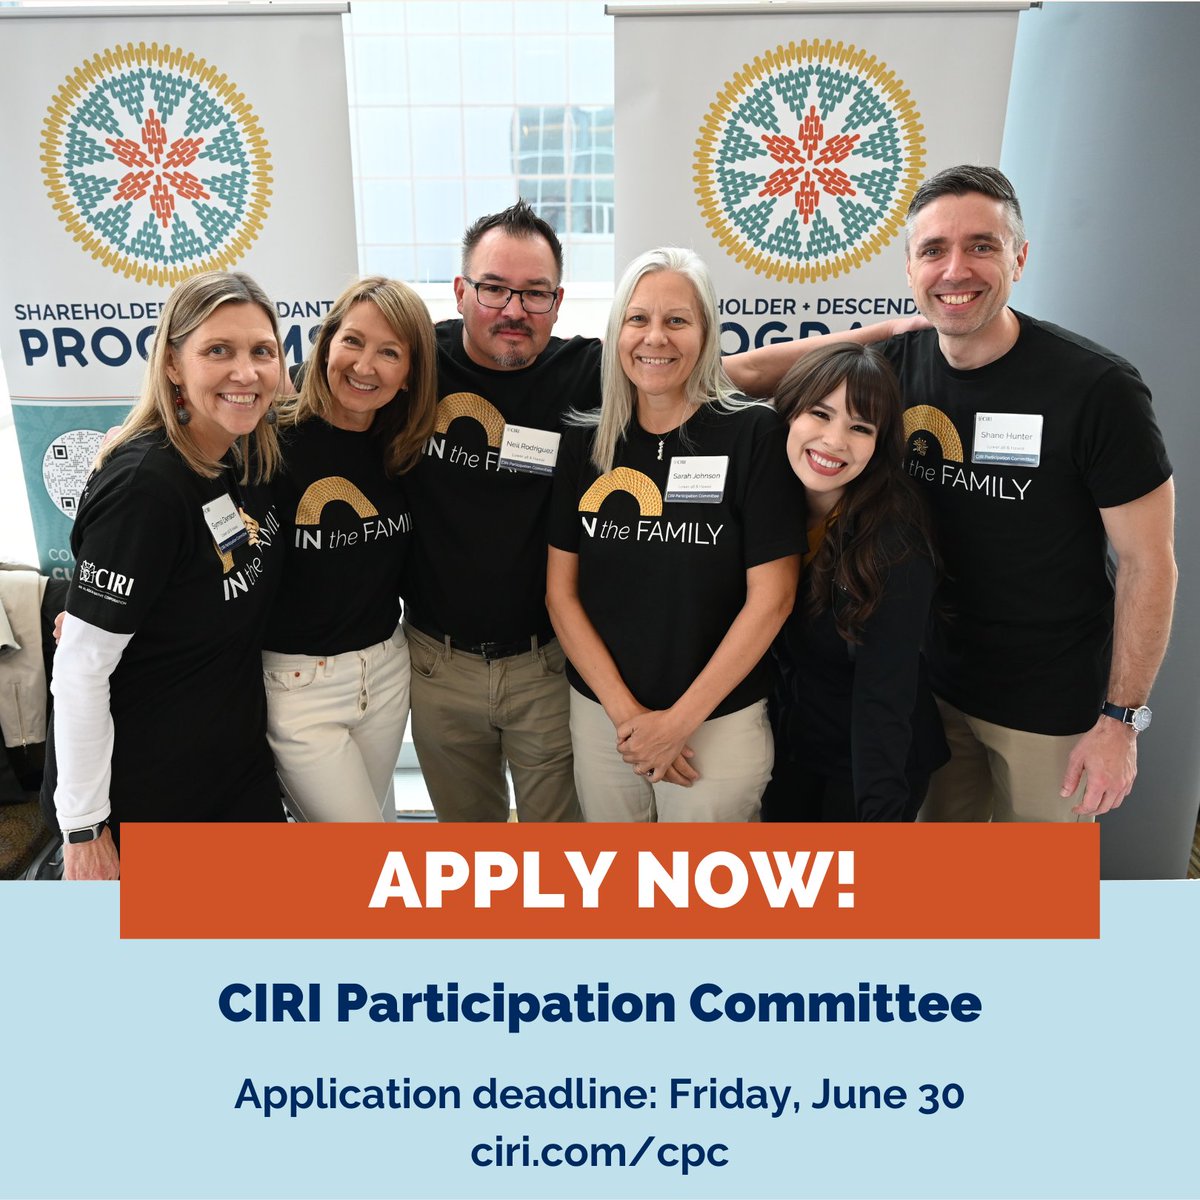 CIRI Shareholders & Descendants (ages 18+) are invited to serve on the CIRI Participation Committee! 🙌 Apply by Friday, June 30: ciri.com/cpc
#CIRIParticipationCommittee #CPC #CIRI #AlaskaNative #AlaskaNativeCorporation #ANC #share #participate #lendyourvoice